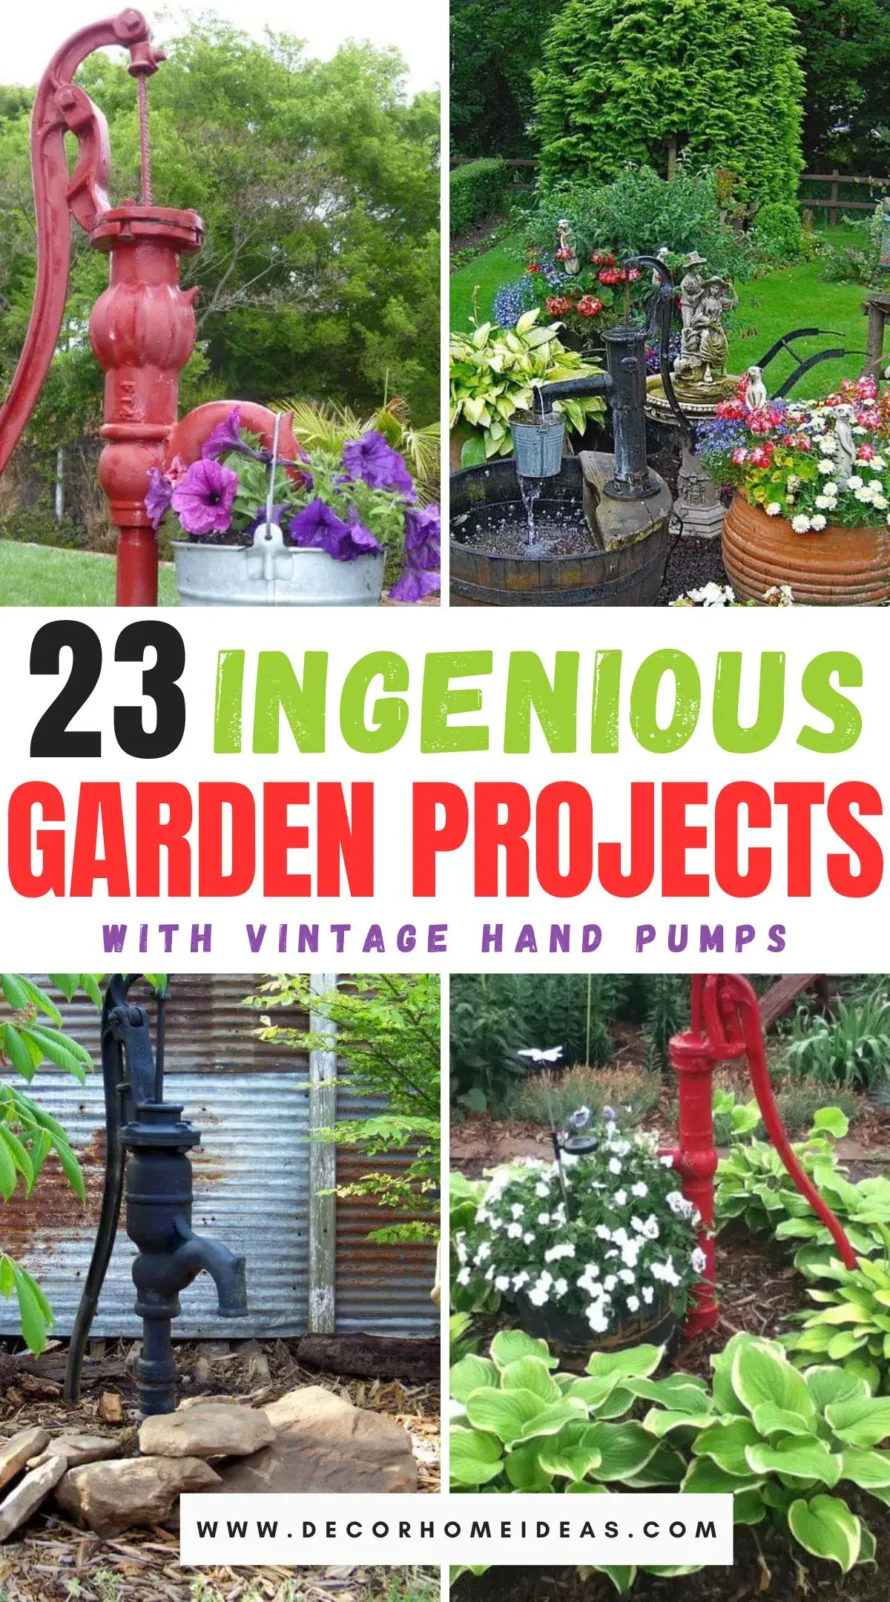 Discover 23 creative ways to repurpose old hand pumps in your garden. From whimsical water features to rustic planters, breathe new life into these vintage treasures for a charming outdoor oasis.